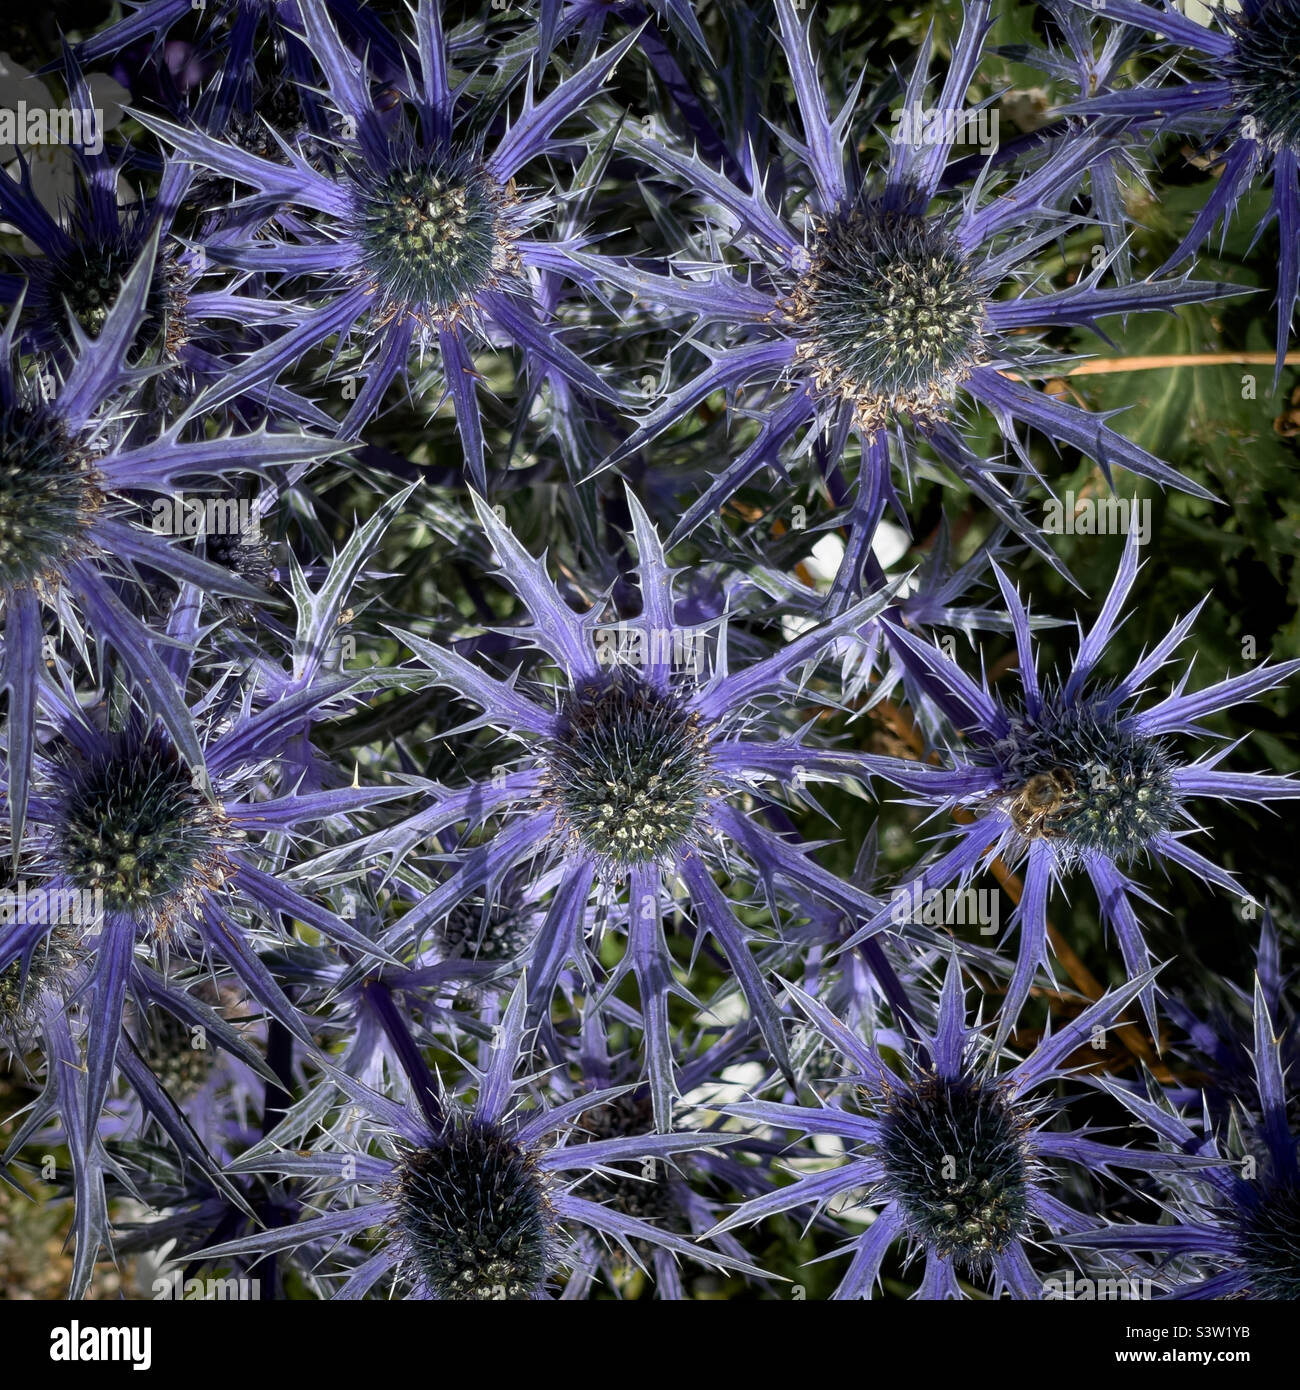 Blue flowers of Eryngium also known as Sea Holly growing in a UK garden. Stock Photo